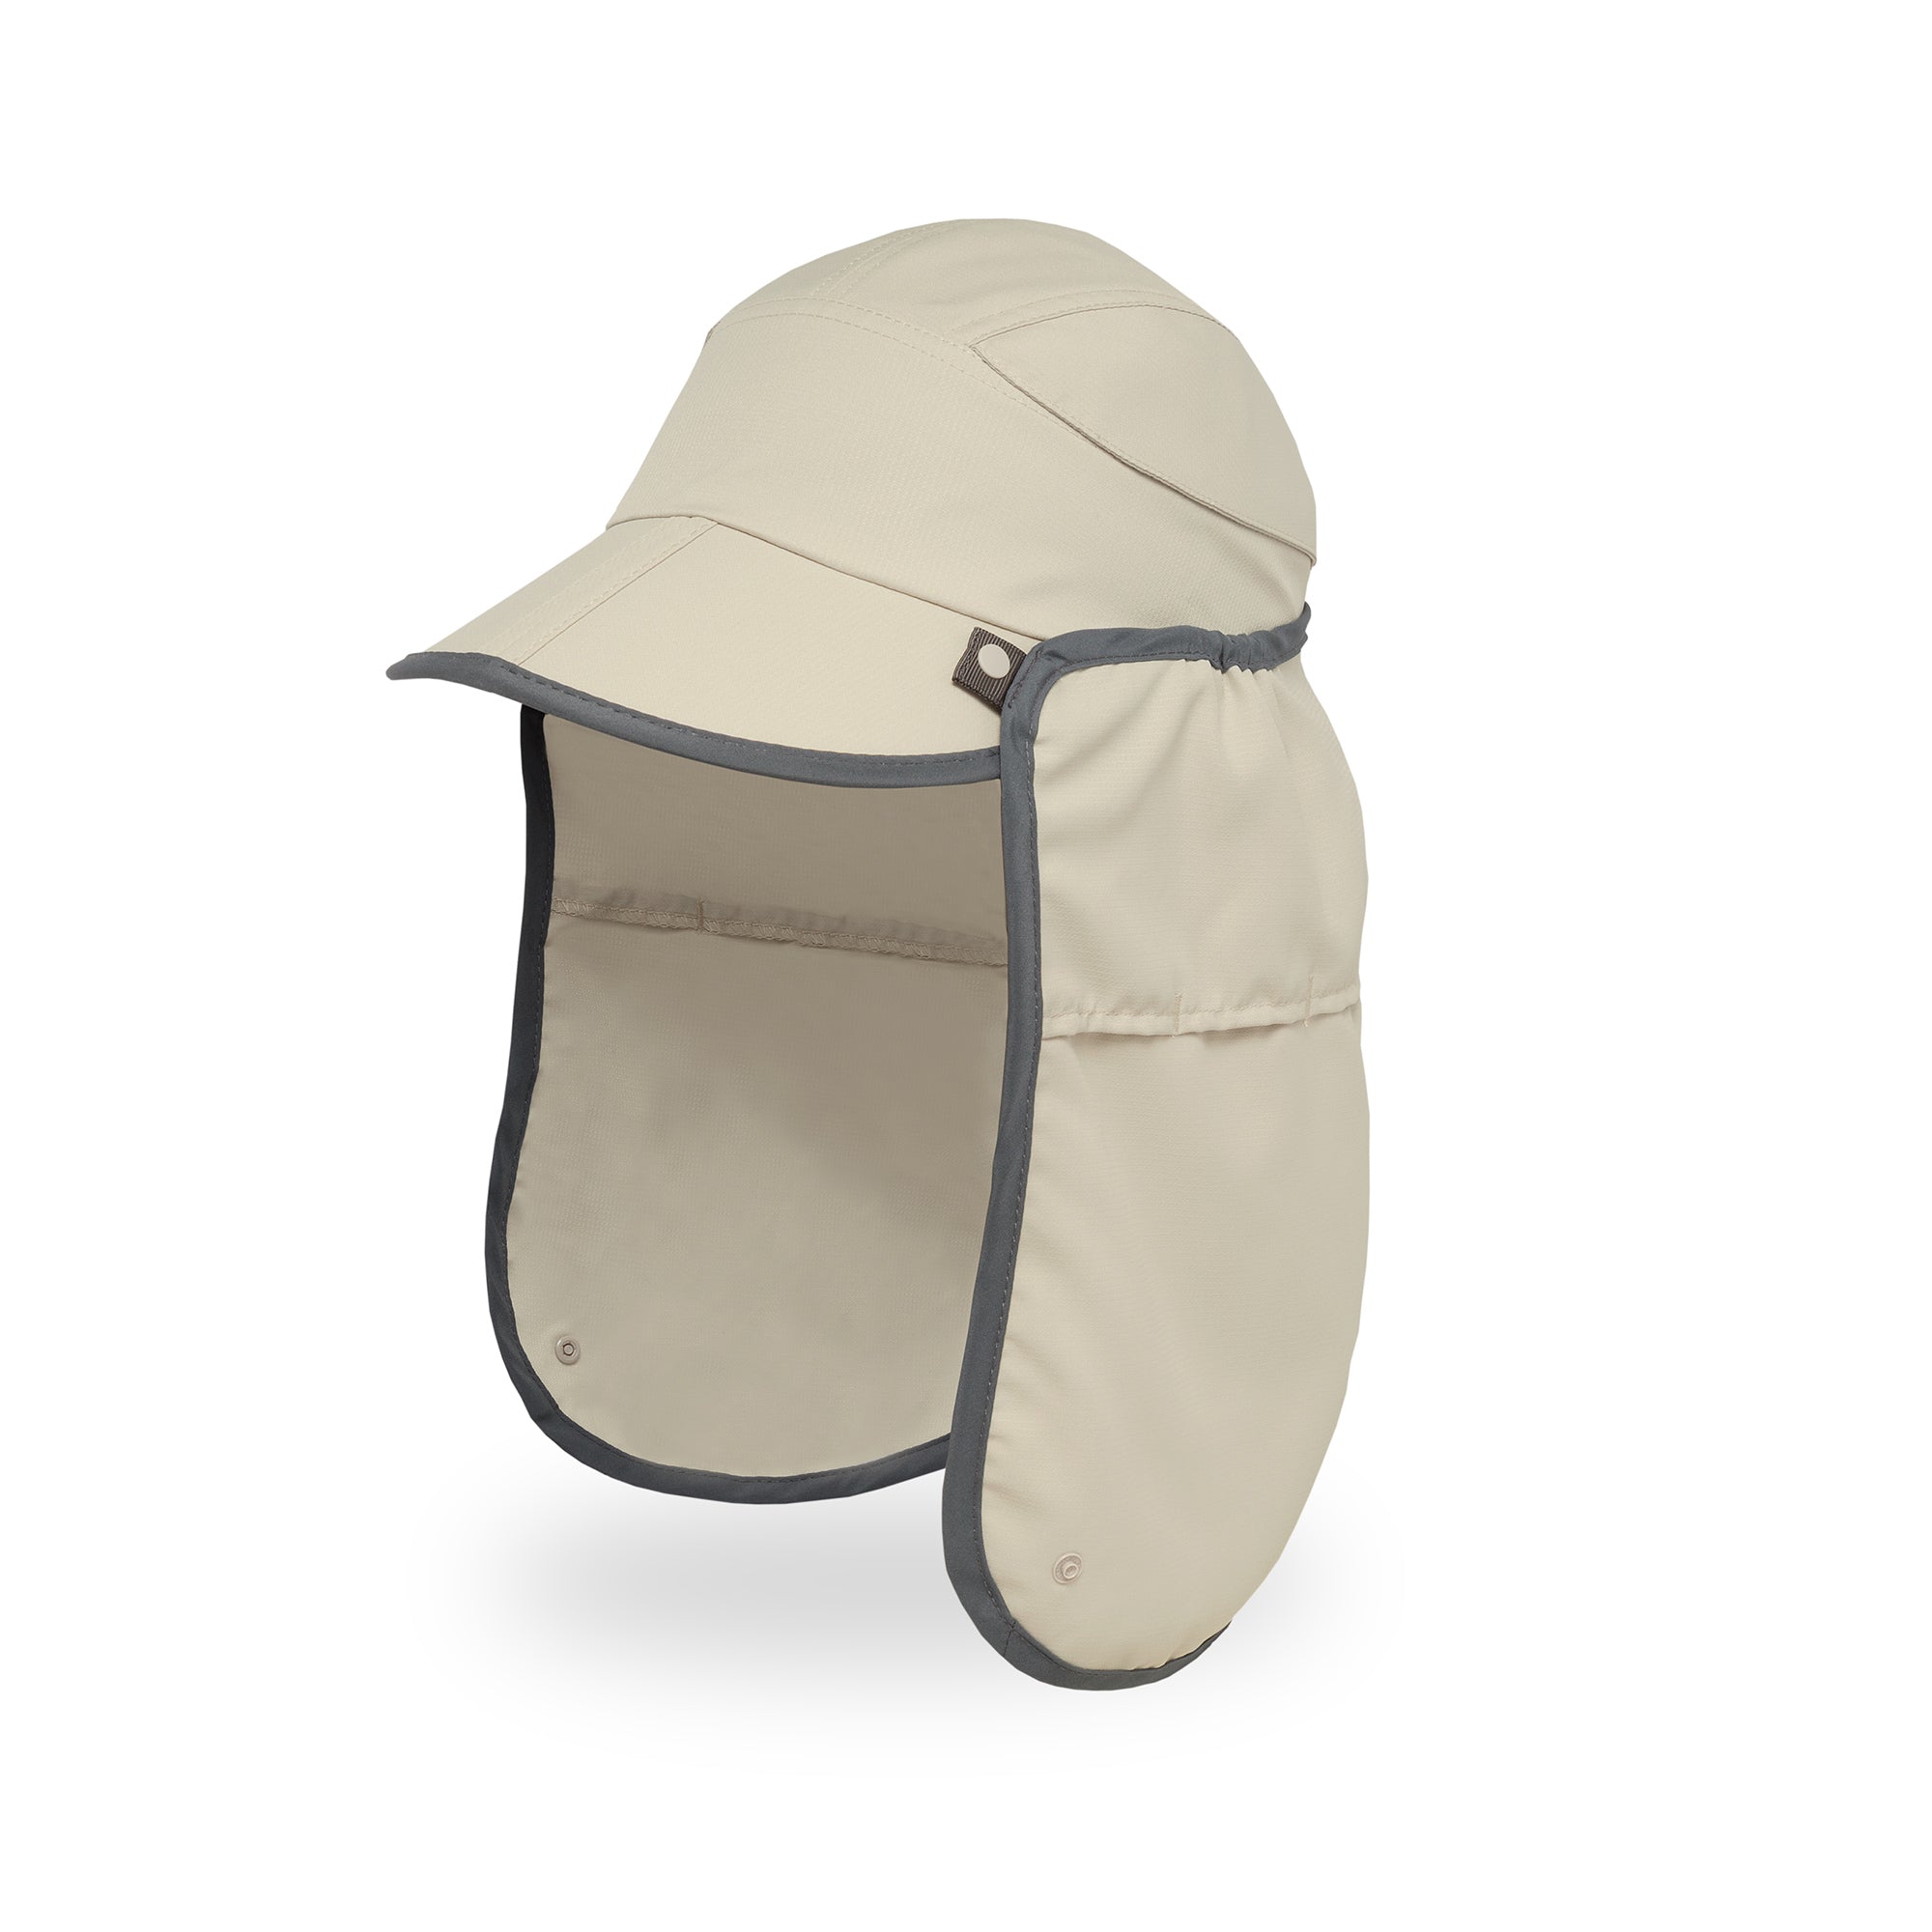 sunday afternoons sun guide cap in sandstone